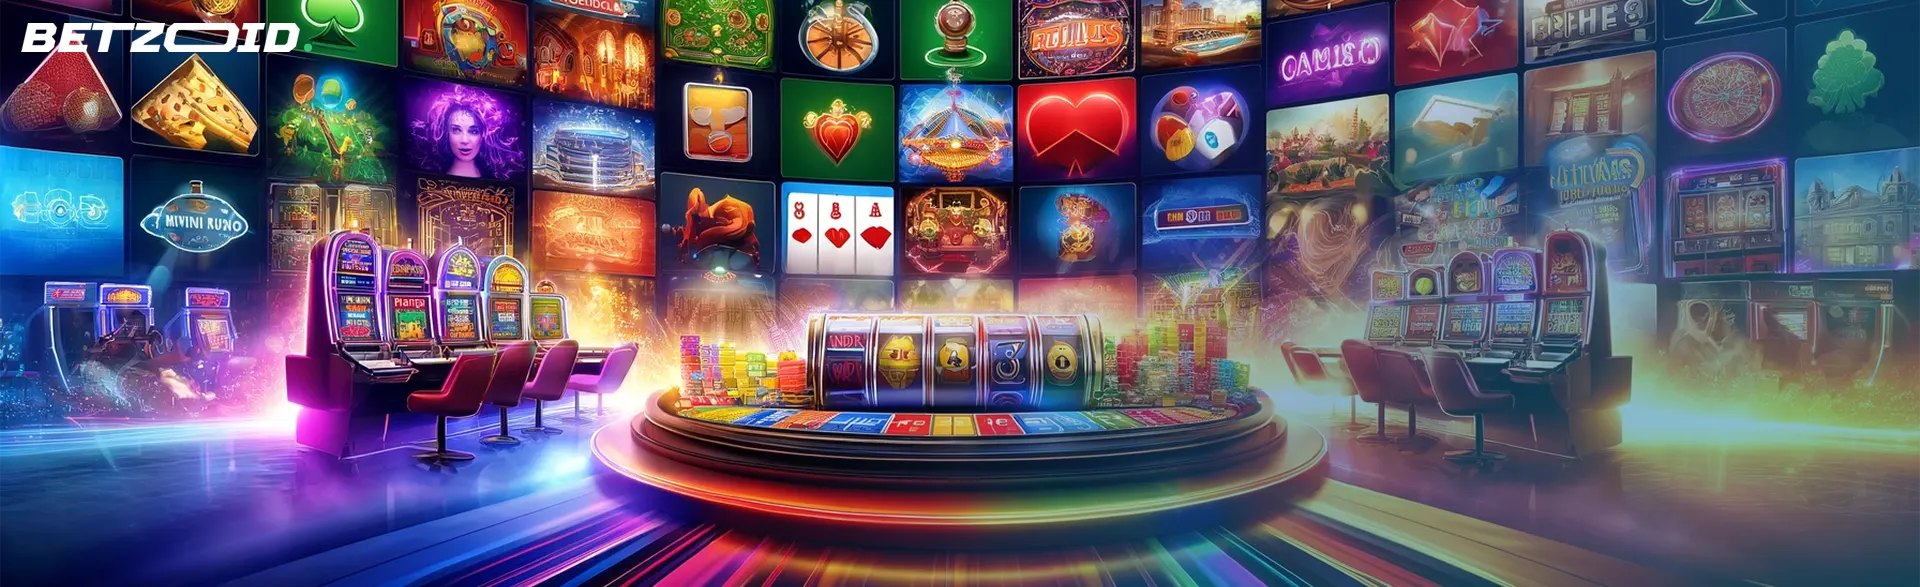 Gameplay at the highest paying online casinos in Canada.